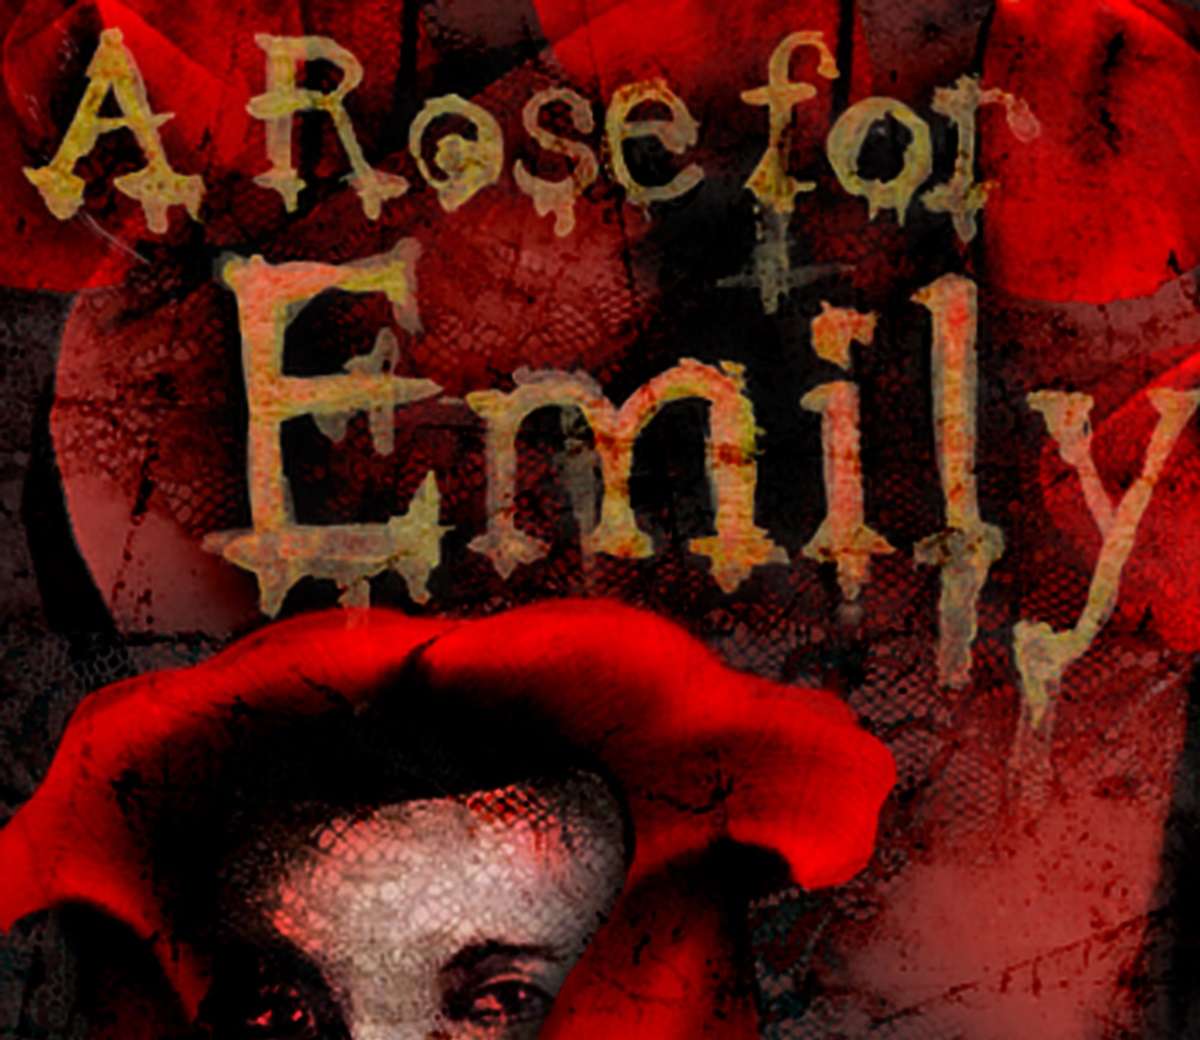 Essay on a rose for emily